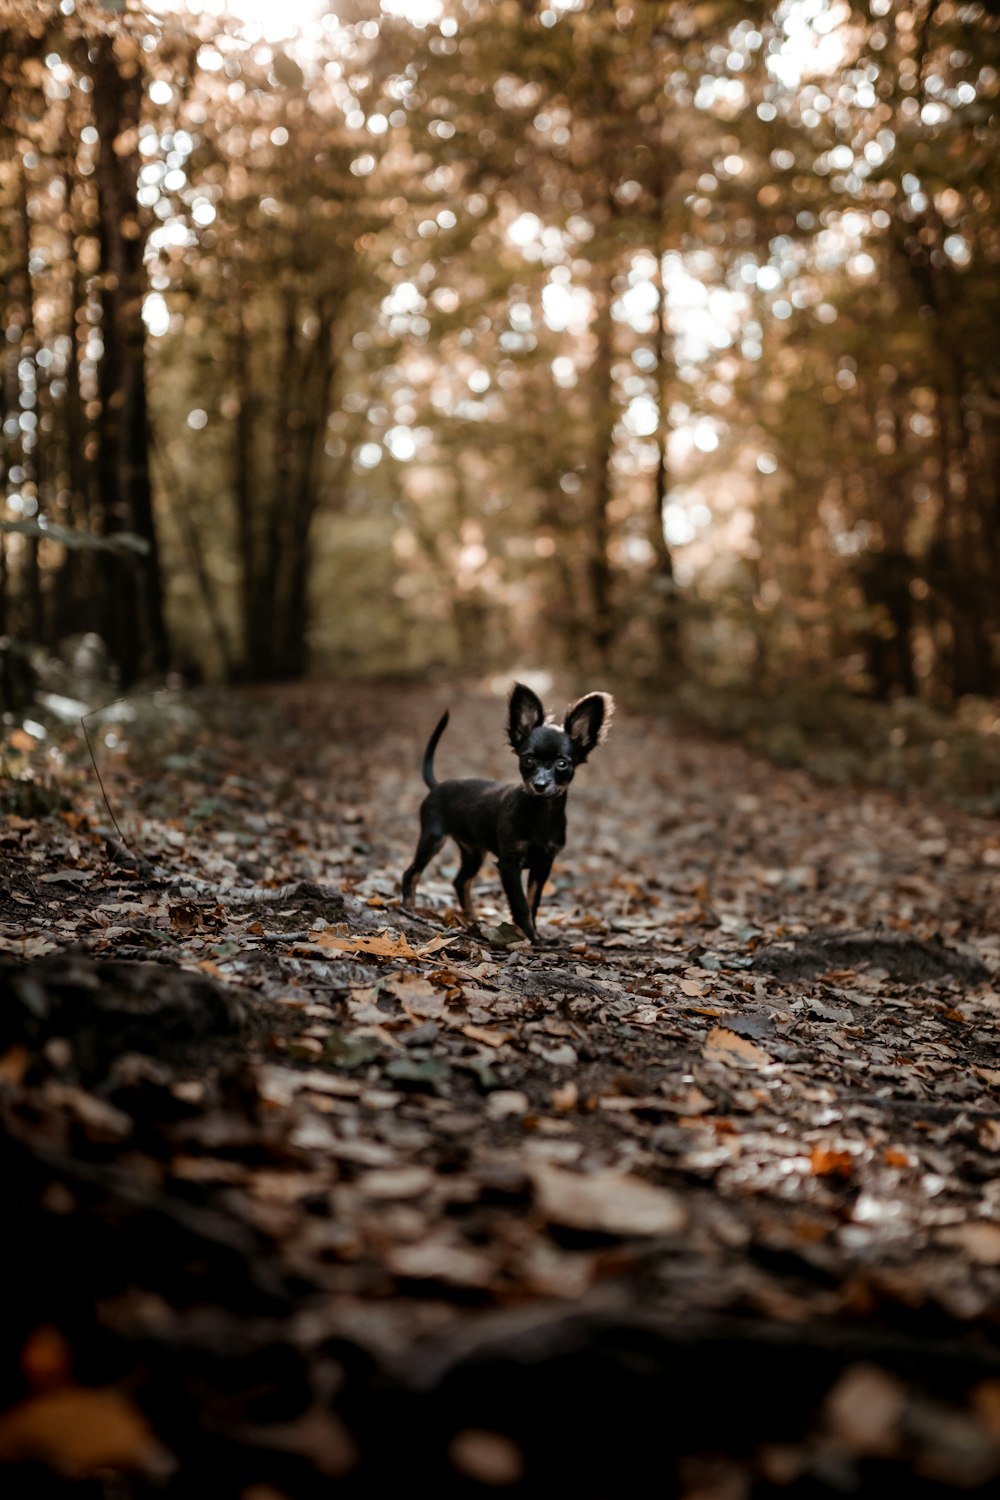 black short coat small dog walking on dried leaves on ground during daytime